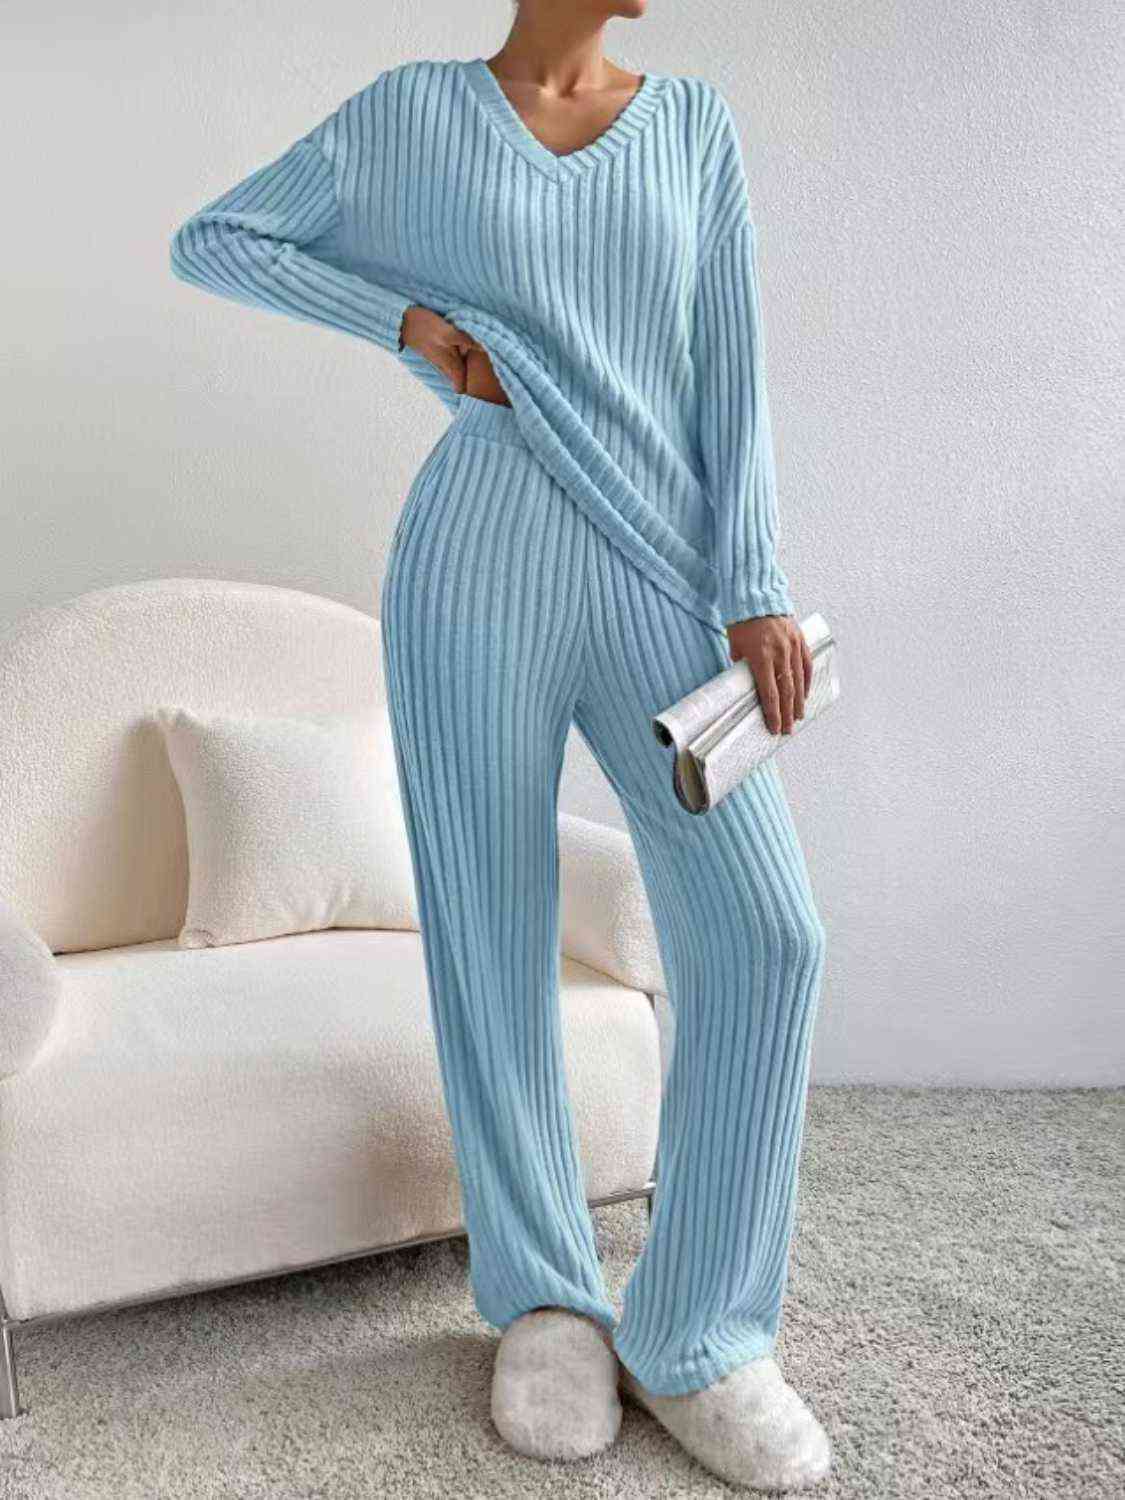 Ribbed V-Neck Long Sleeve Top and Pants Set (4 Colors) Outfit Sets Krazy Heart Designs Boutique   